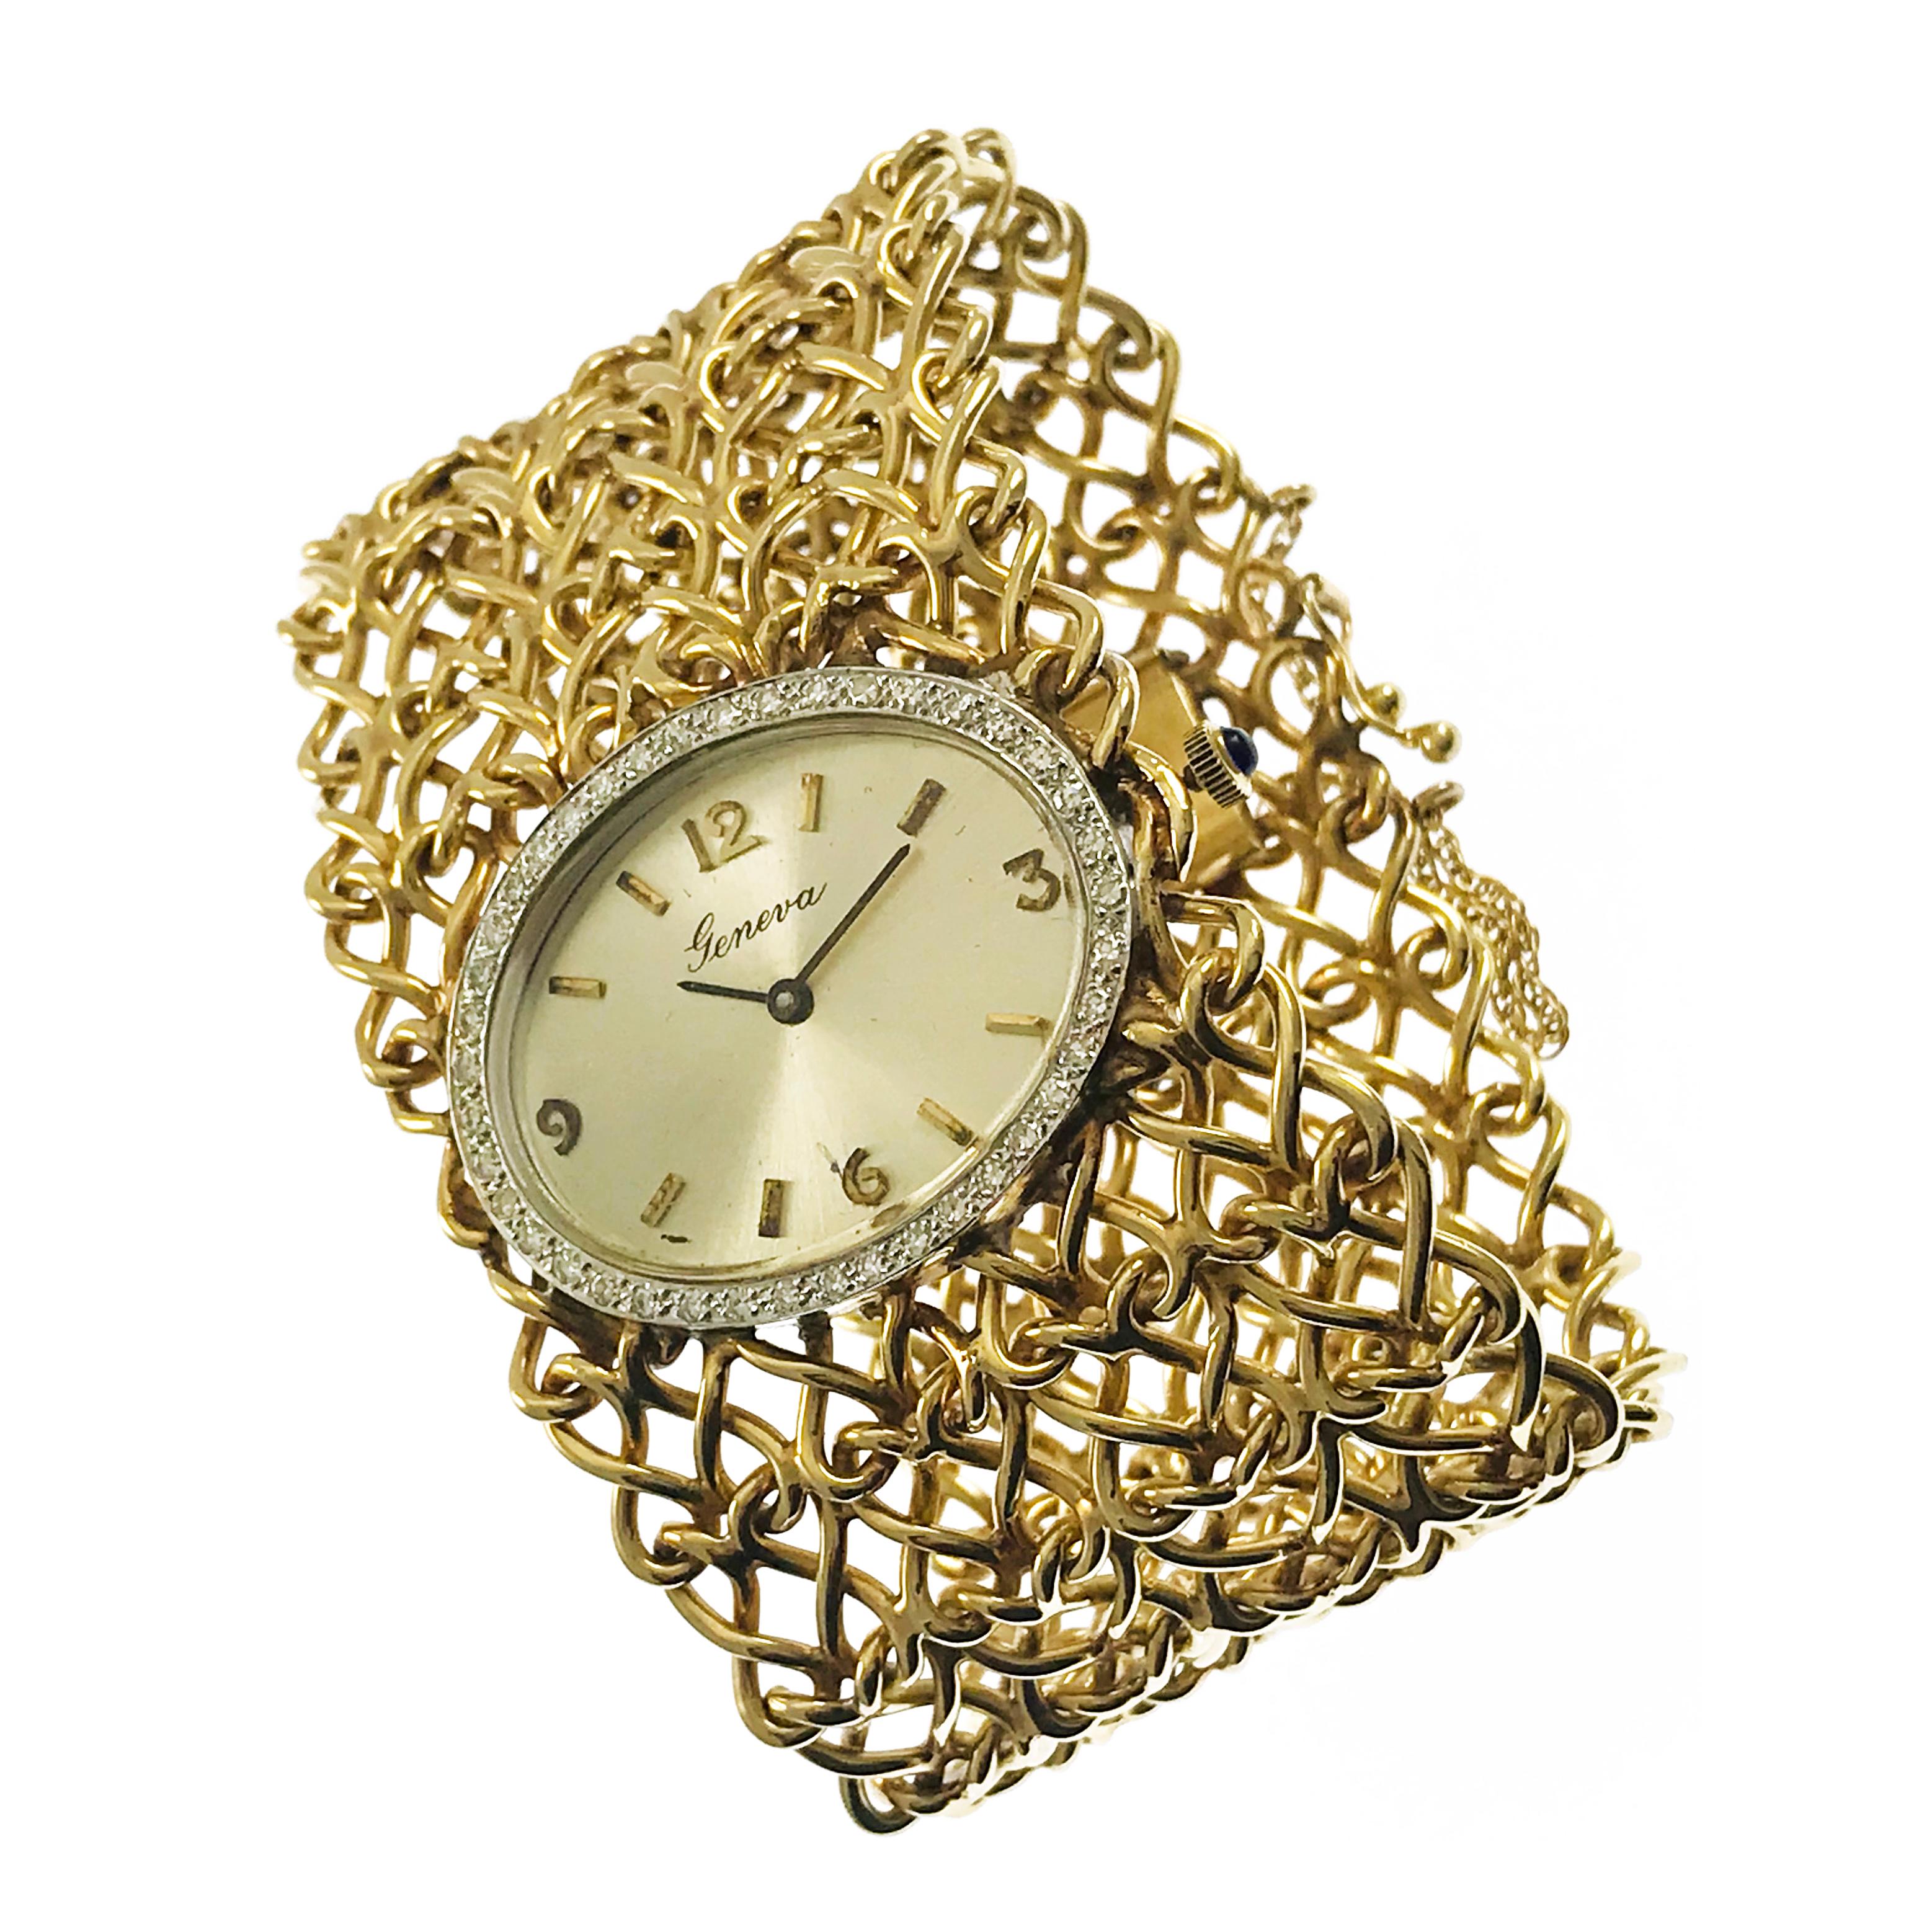 Ladies Geneva 14k Diamond Bracelet Watch, Circa 1970s. The dial is framed with forty-one round diamonds with black baton hour and minute hands. The single-cut diamonds are VS2 in clarity (G.I.A.) and H-I in color (G.I.A.). The diamonds are 1.5mm for